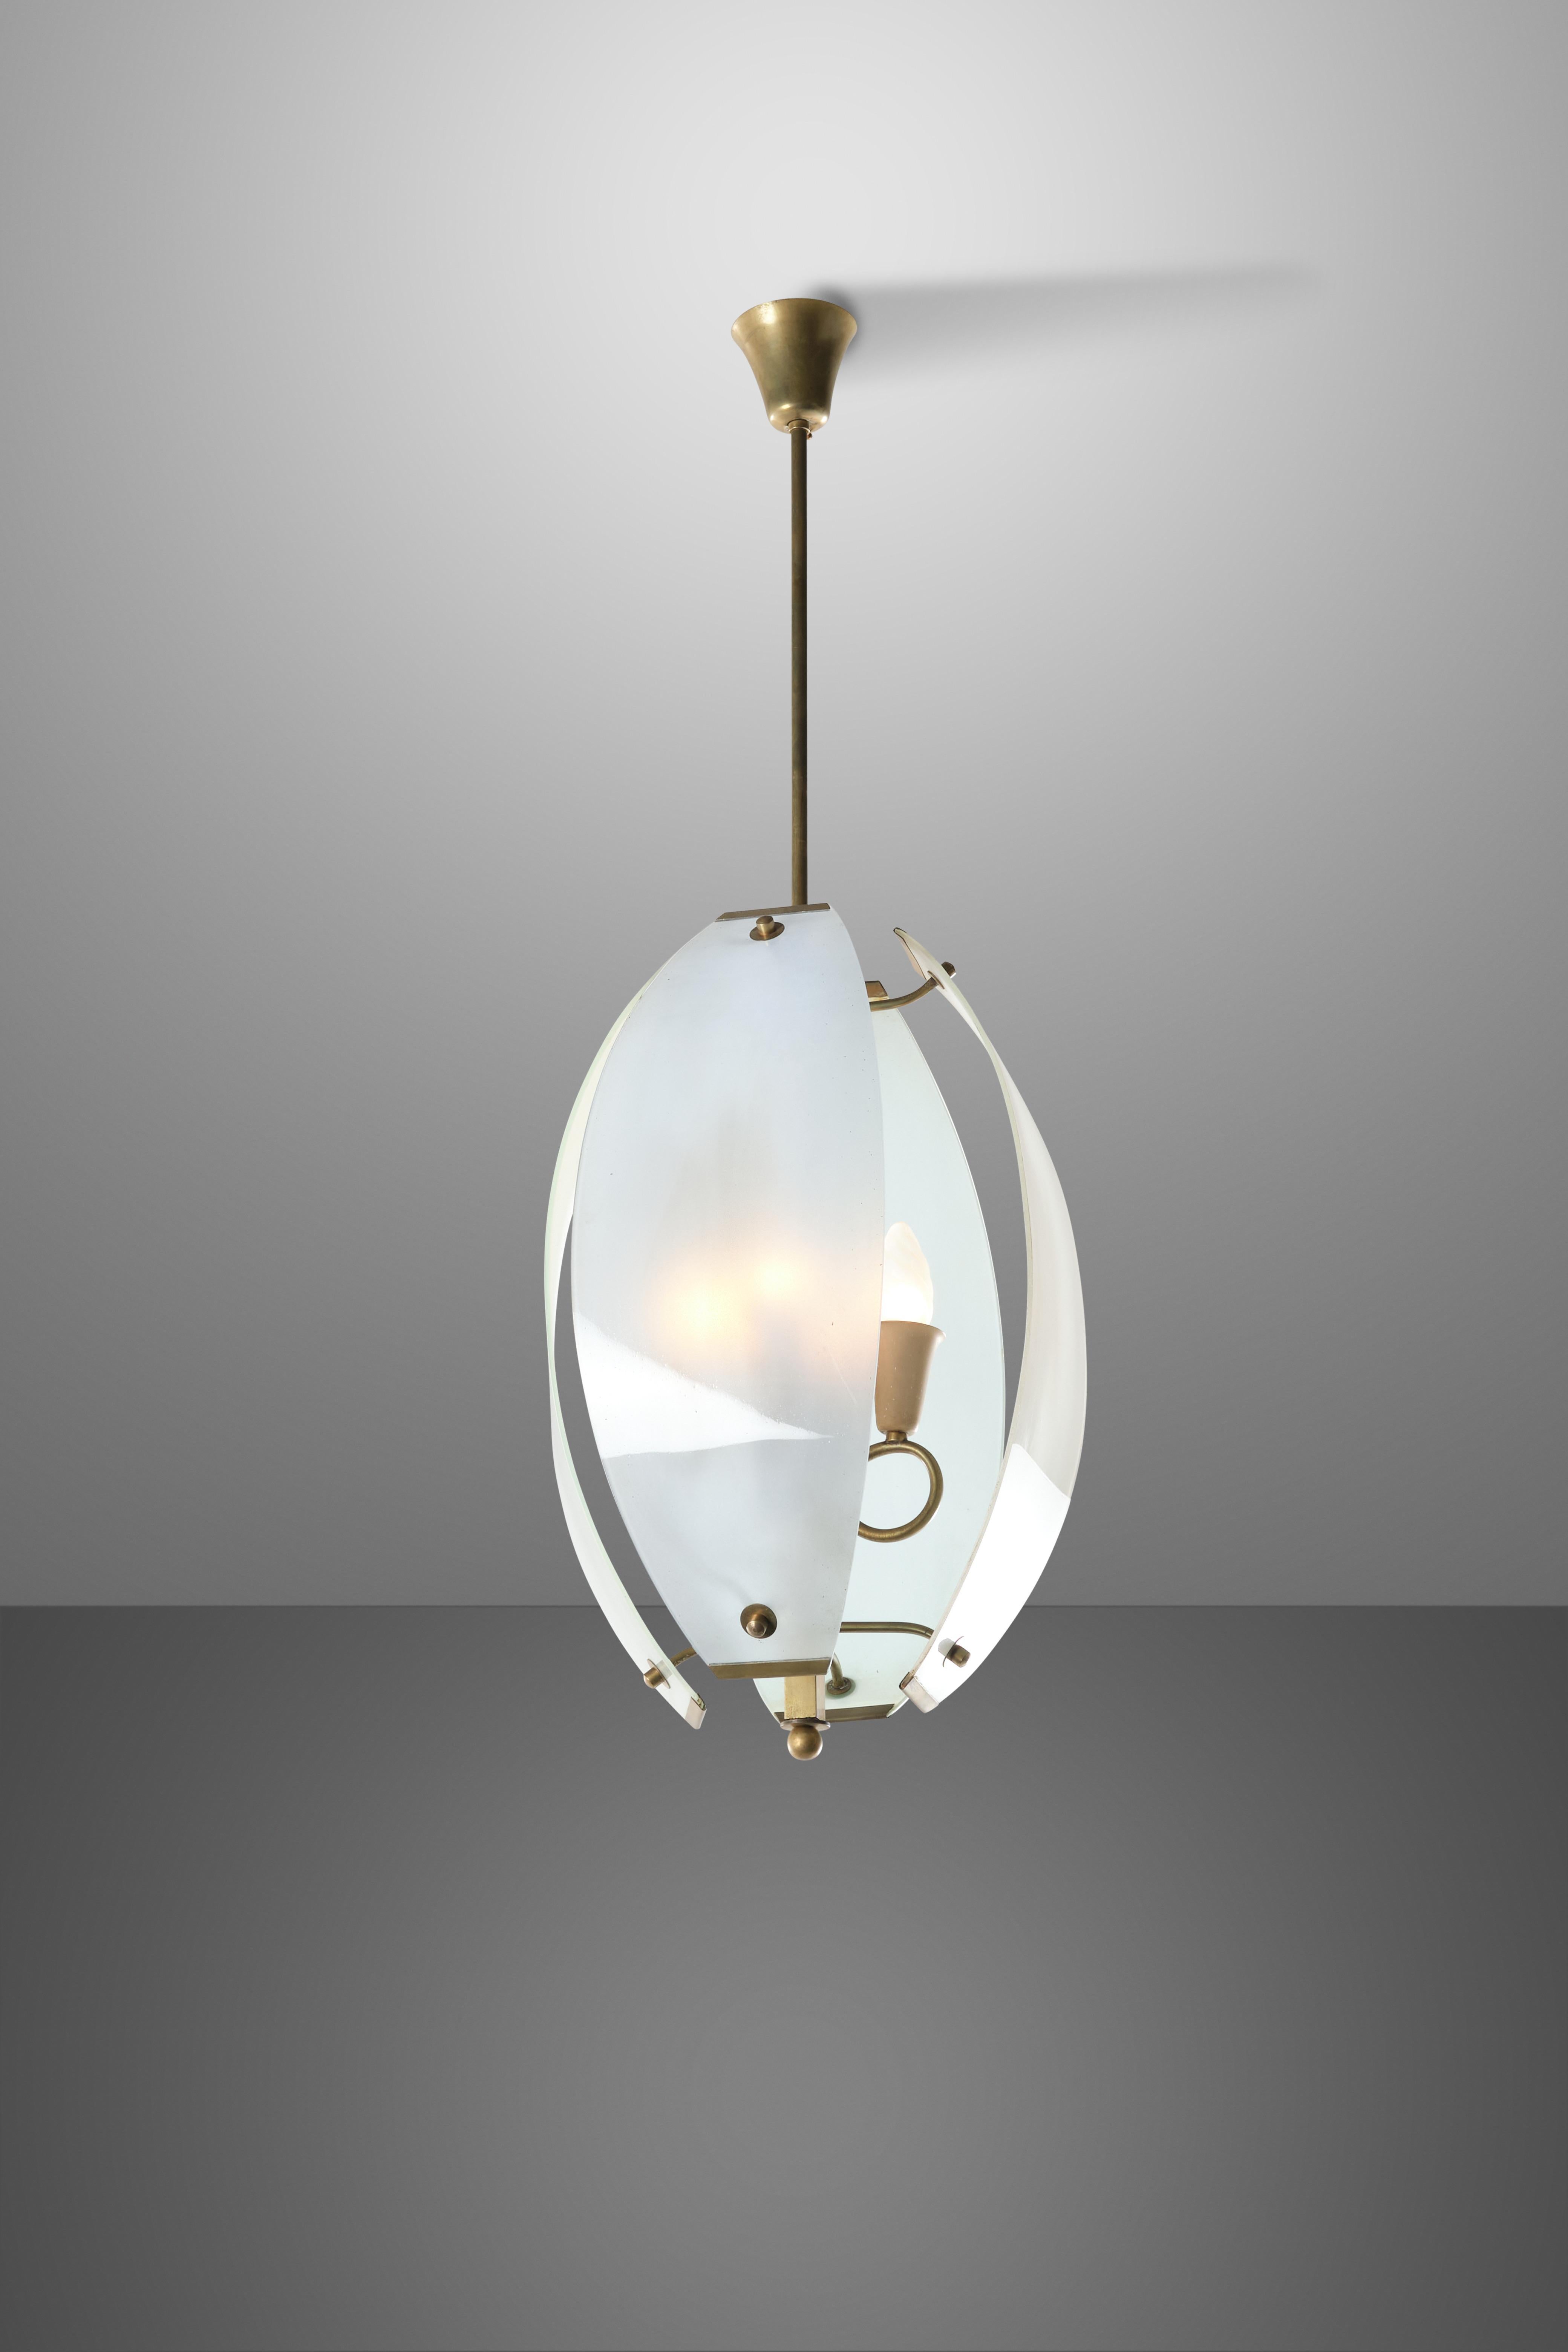 Light and delicate, this mid-century chandelier seems to use the curved screens of frosted crystal as propellers to hang in the air and provide light to the room without apparently being connected to anything. The interplay of direct and